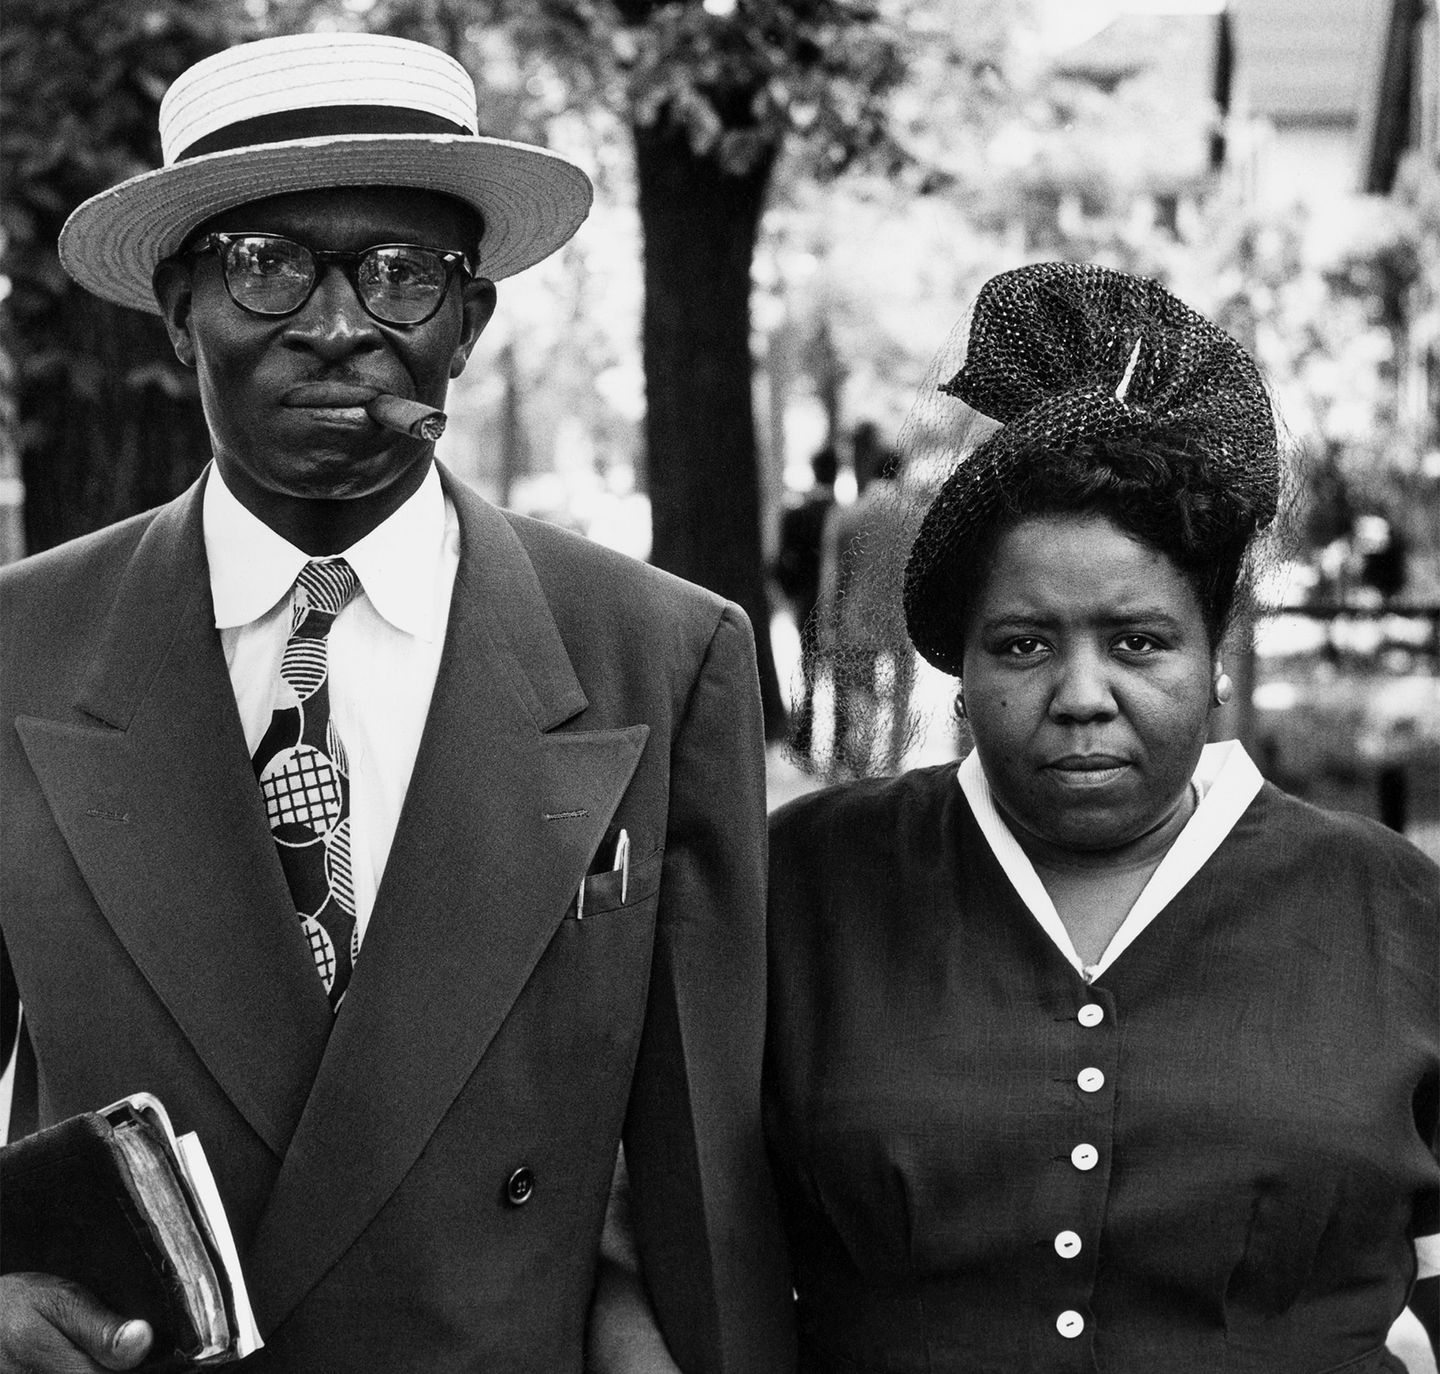 Photographer Gordon Parks returned home to Kansas to retrace his childhood and find classmates, 24 years after leaving – The Washington Post